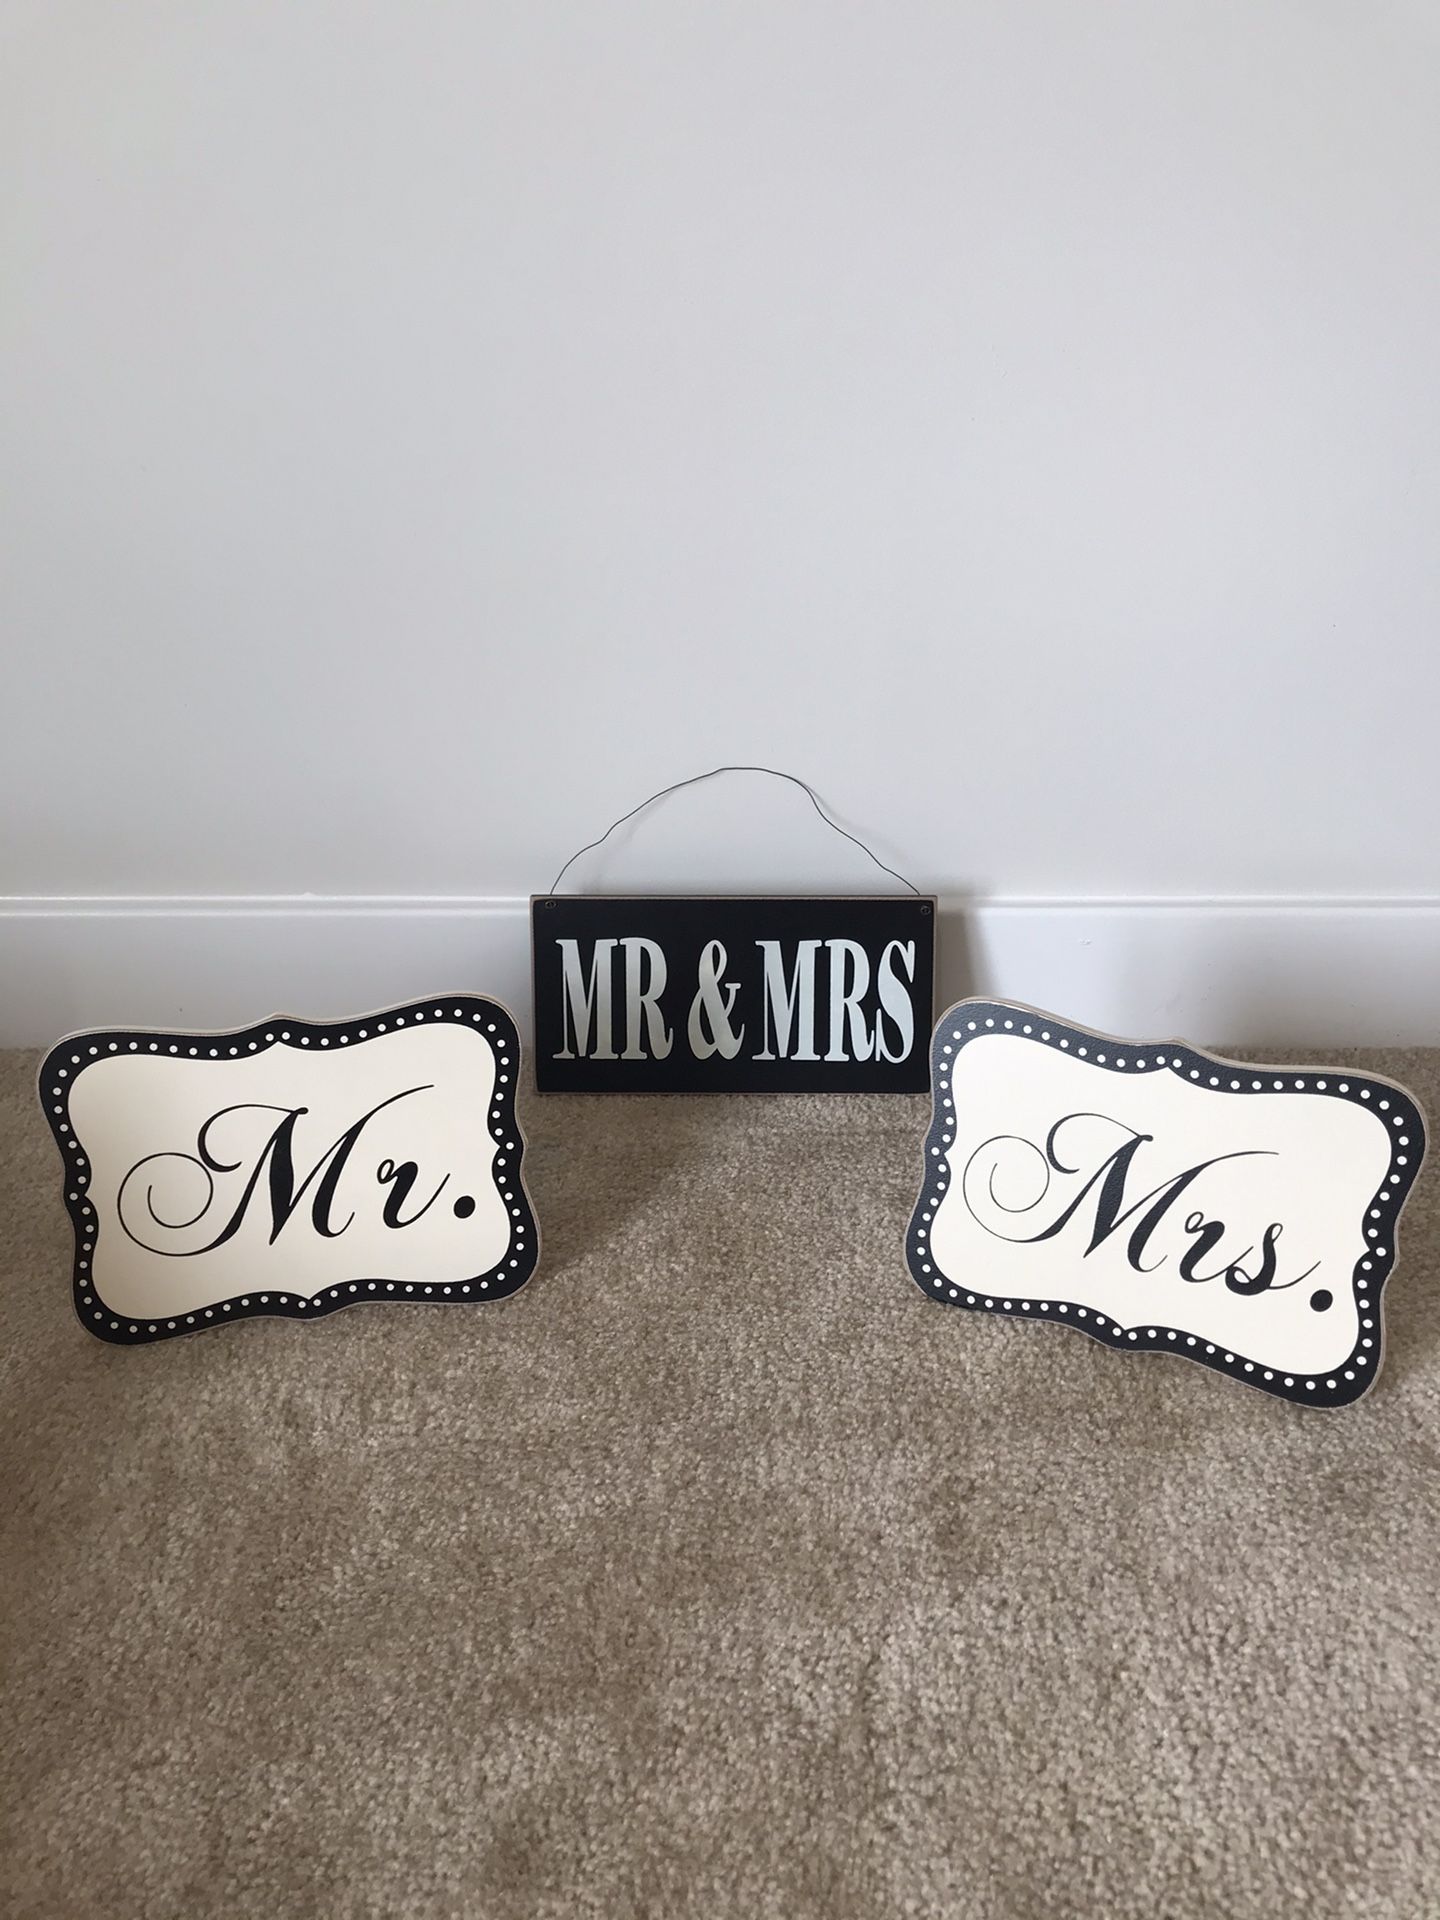 Mr and mrs signs